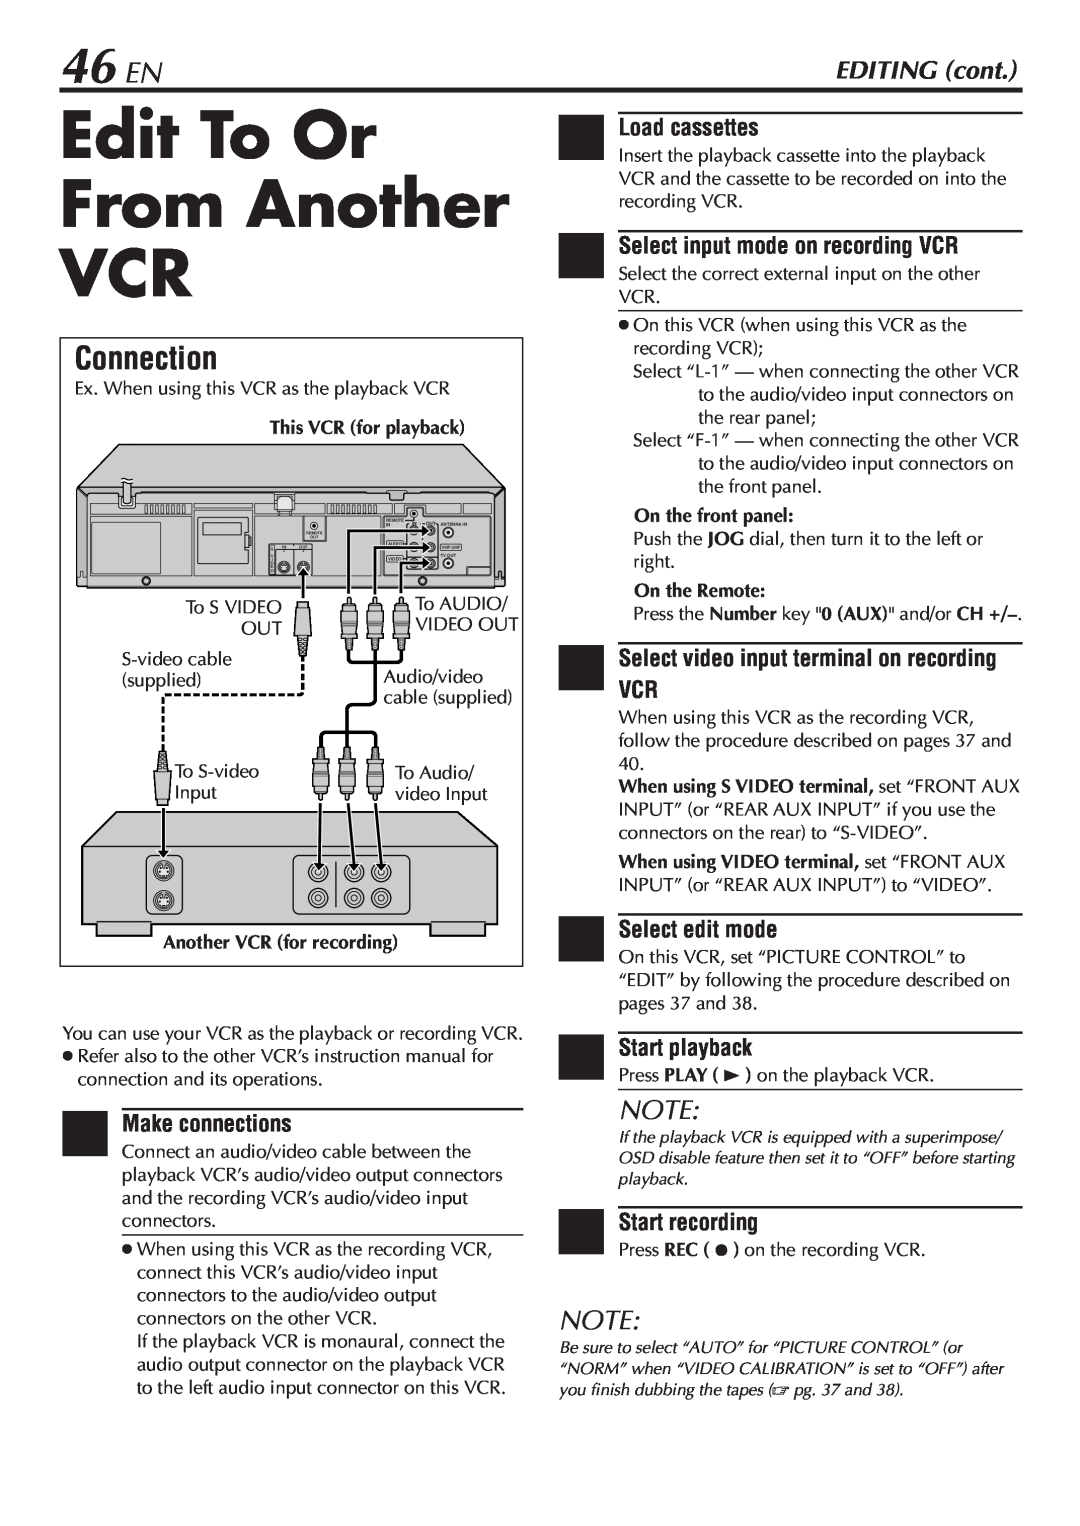 JVC SR-V10U Edit To Or From Another VCR, 46 EN, EDITING cont, Load cassettes, Select video input terminal on recording VCR 